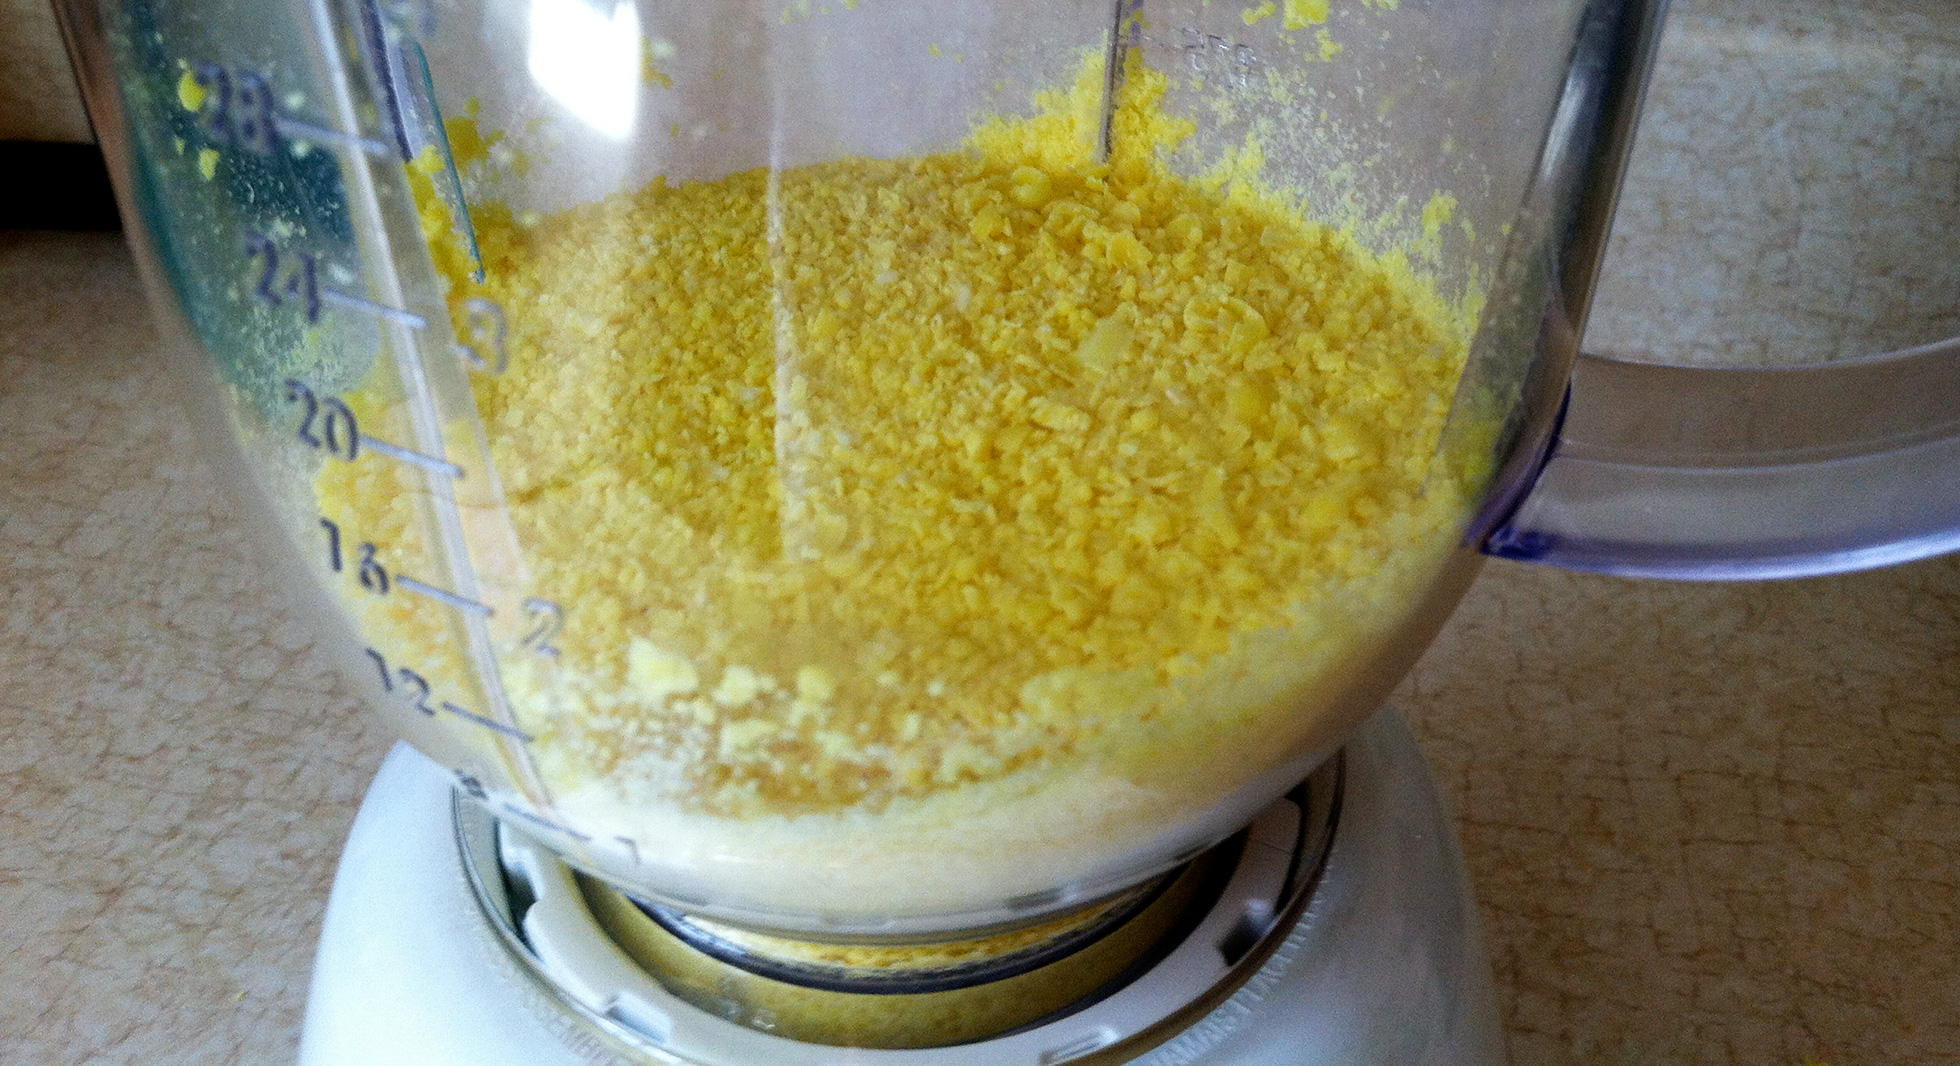 Blender used for mixing ingredients for laundry detergent